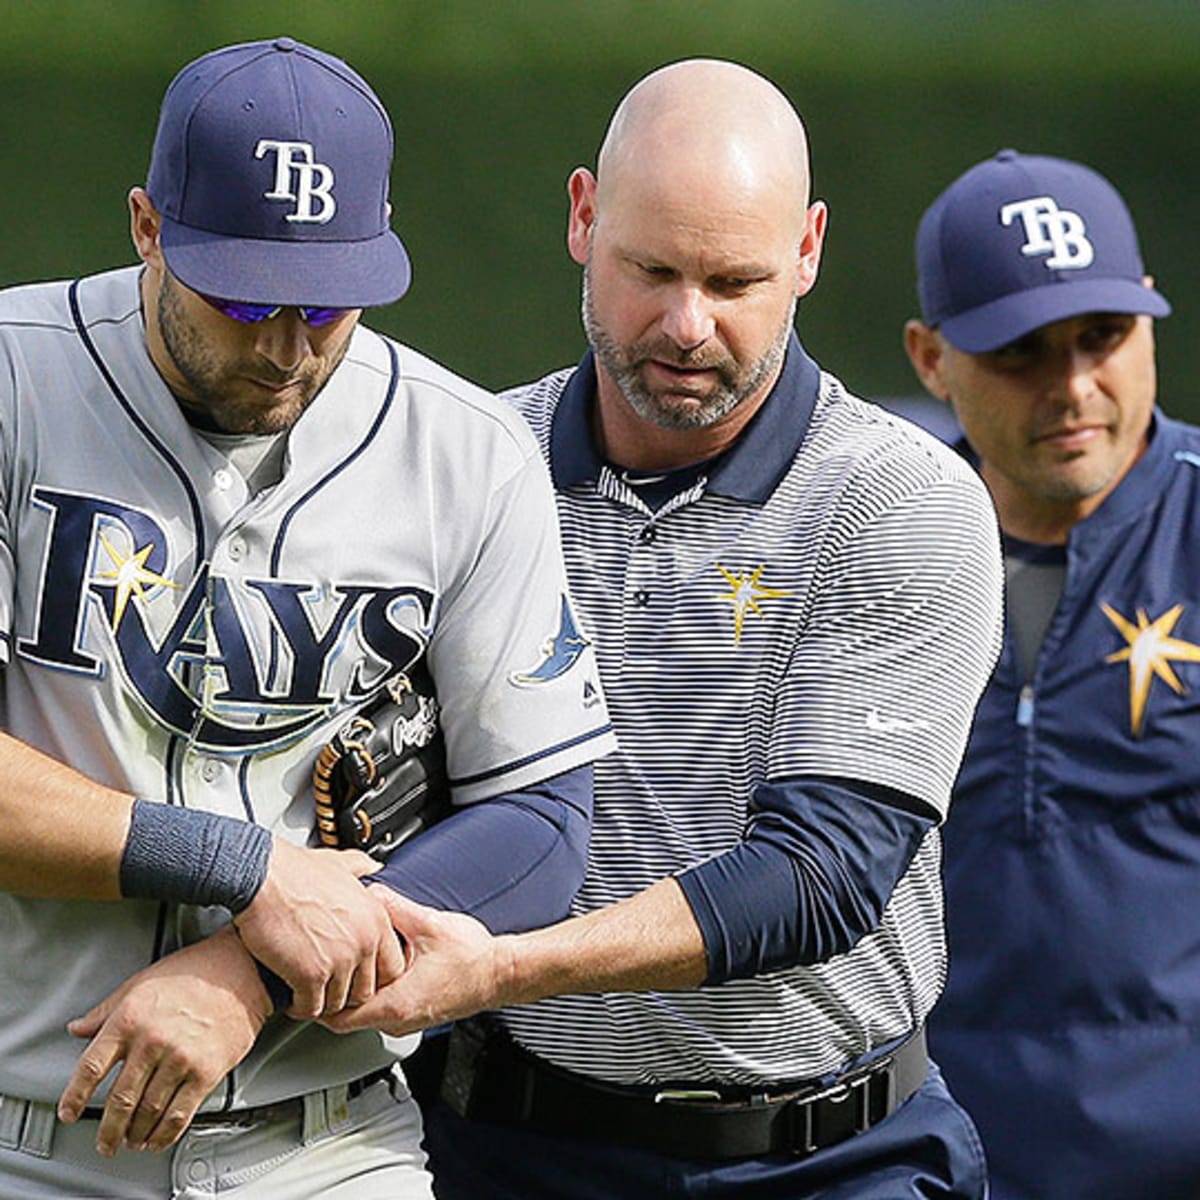 Rays: Kevin Kiermaier injury another hit to Tampa Bay - Sports Illustrated